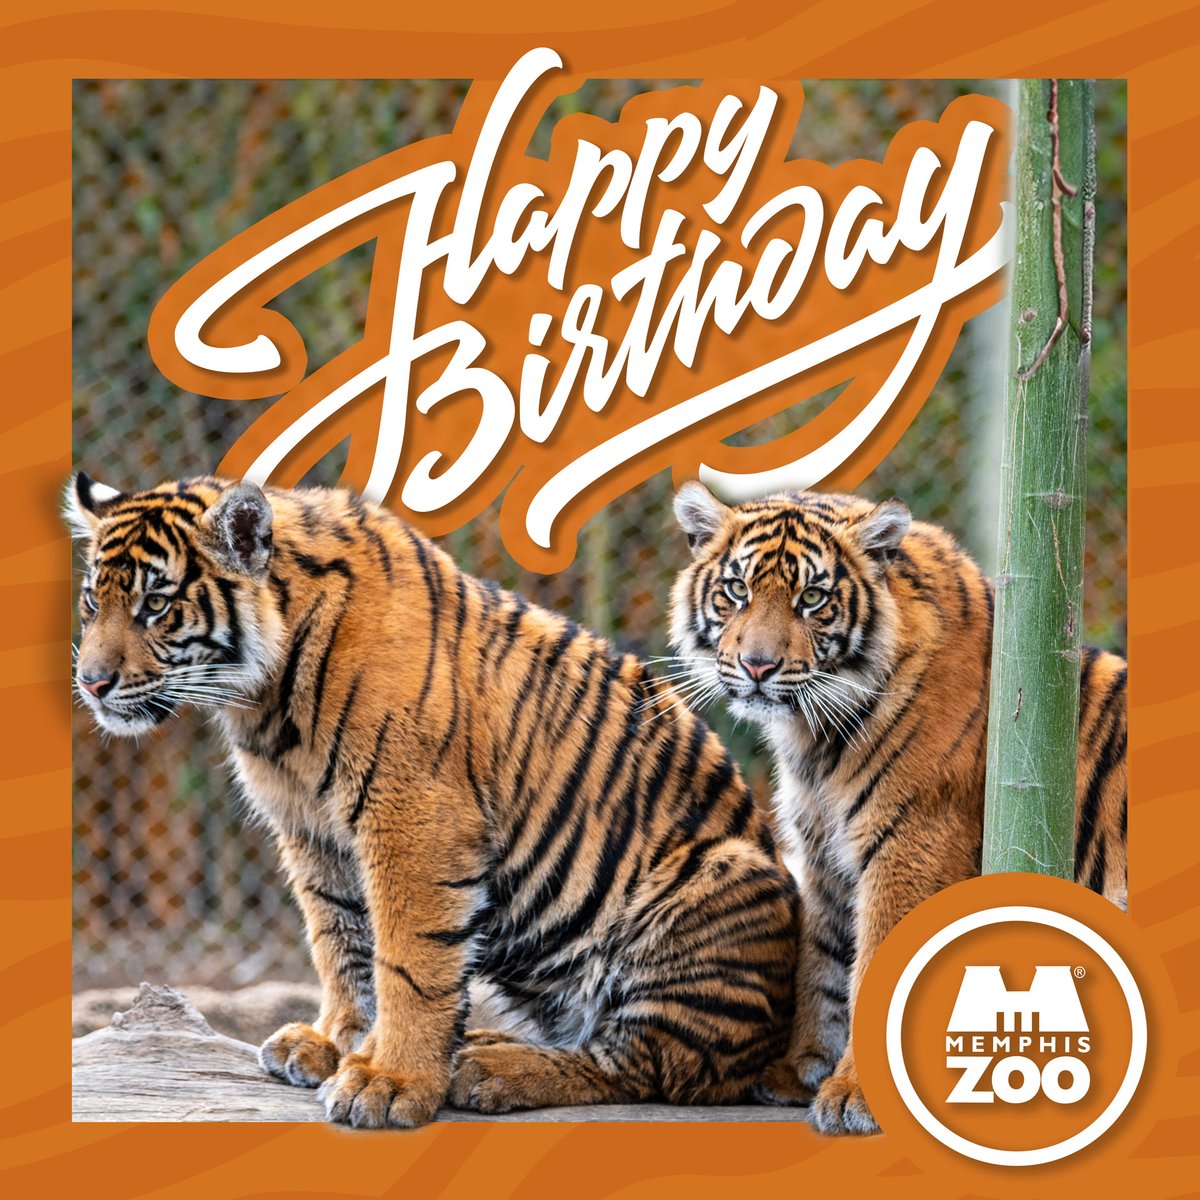 🎉 🎂 Happy first birthday to Nakal and Suci! They are serving as wonderful ambassadors for their species. We are excited to witness their growth and development and hope they inspire people to take action towards protecting wildlife and preserving the natural world. #MemphisZoo